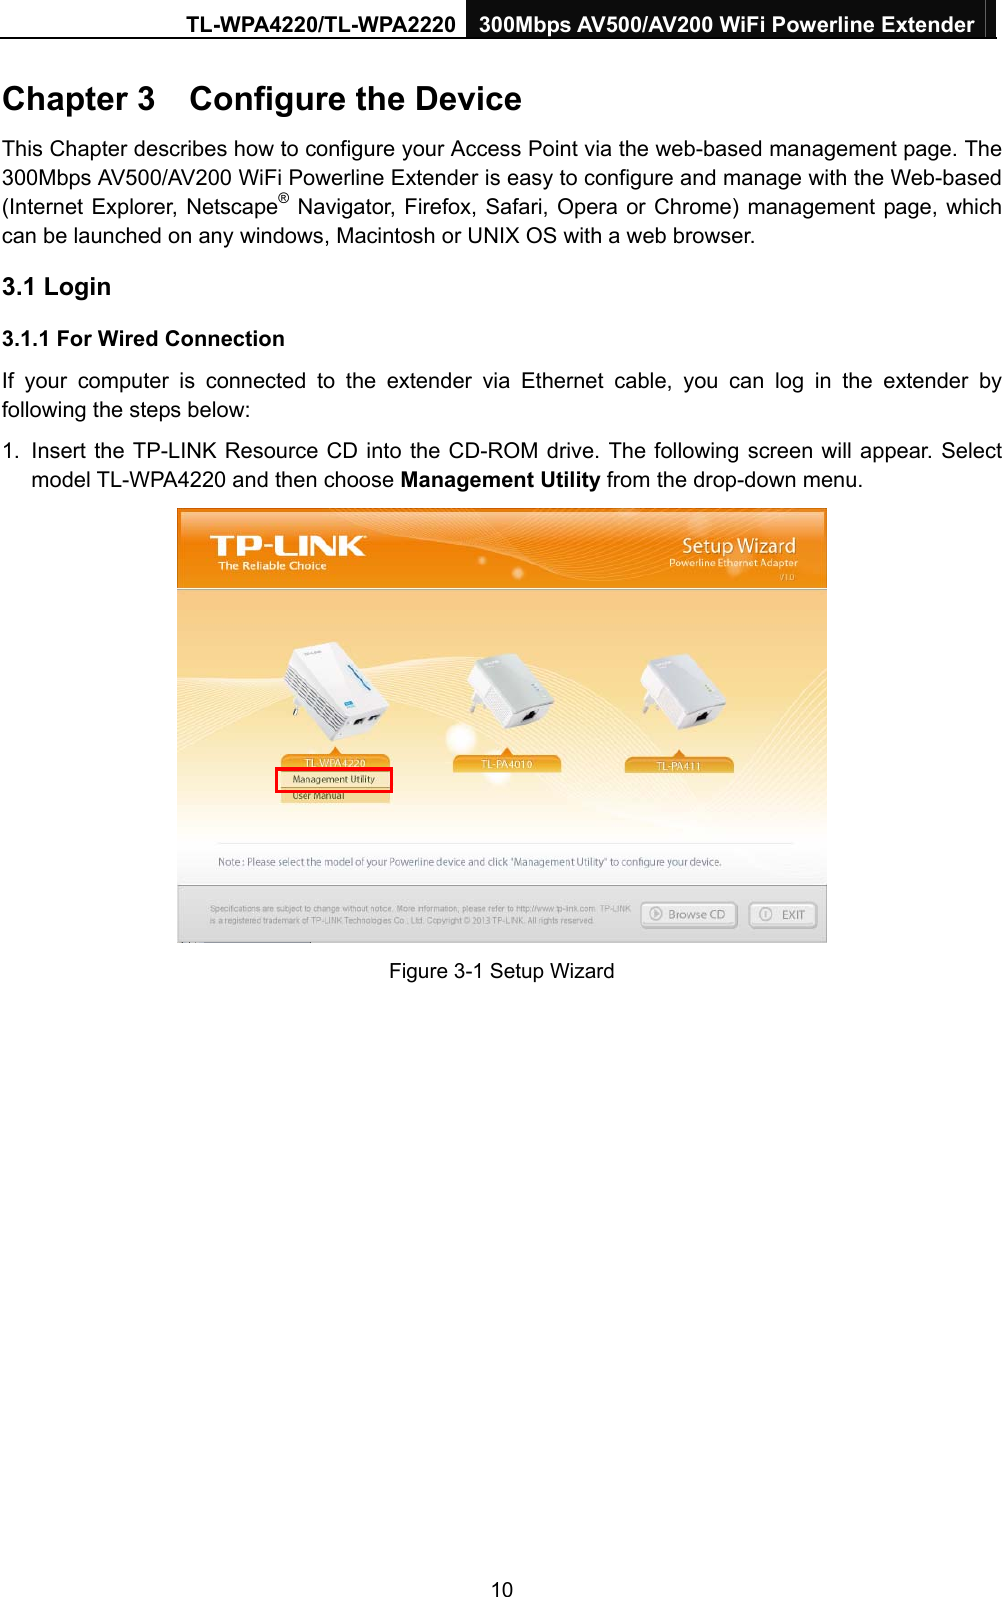 TL-WPA4220/TL-WPA2220 300Mbps AV500/AV200 WiFi Powerline Extender  10 Chapter 3    Configure the Device This Chapter describes how to configure your Access Point via the web-based management page. The 300Mbps AV500/AV200 WiFi Powerline Extender is easy to configure and manage with the Web-based (Internet Explorer, Netscape® Navigator, Firefox, Safari, Opera or Chrome) management page, which can be launched on any windows, Macintosh or UNIX OS with a web browser. 3.1 Login 3.1.1 For Wired Connection If your computer is connected to the extender via Ethernet cable, you can log in the extender by following the steps below:   1.  Insert the TP-LINK Resource CD into the CD-ROM drive. The following screen will appear. Select model TL-WPA4220 and then choose Management Utility from the drop-down menu.  Figure 3-1 Setup Wizard 